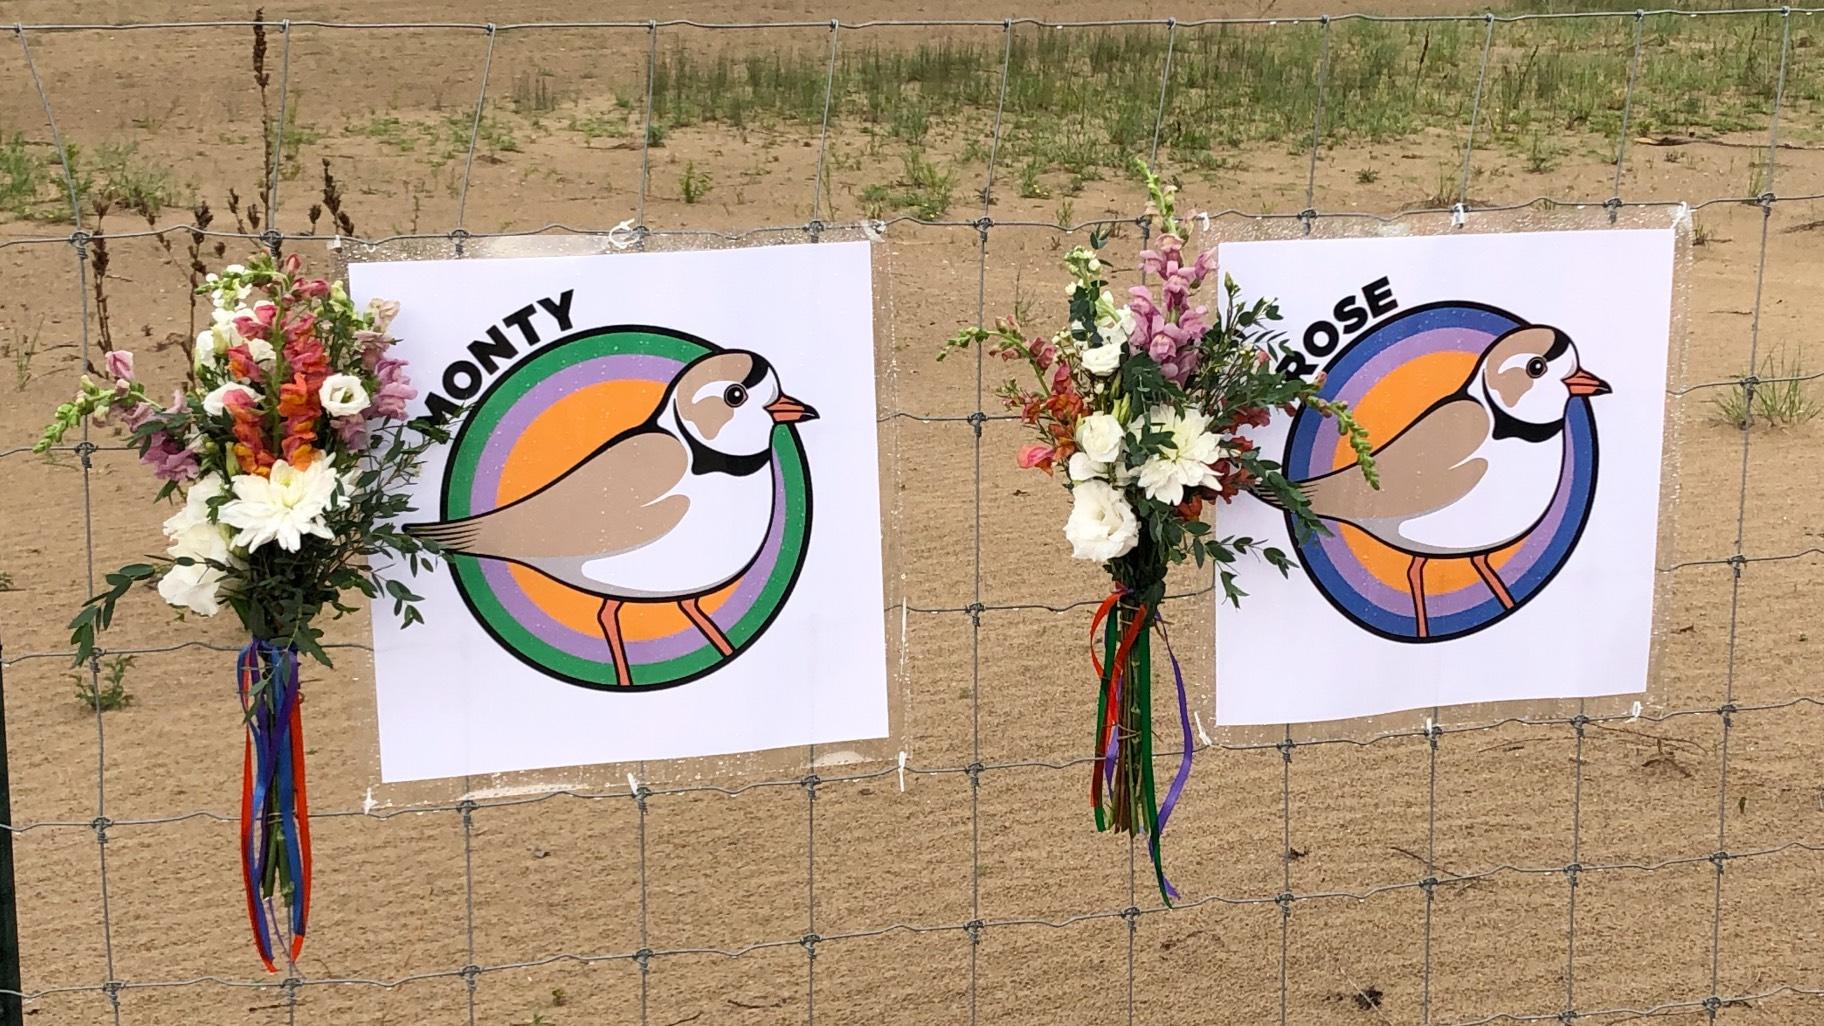 A memorial for piping plovers Monty and Rose at Montrose Beach. (Patty Wetli / WTTW News)